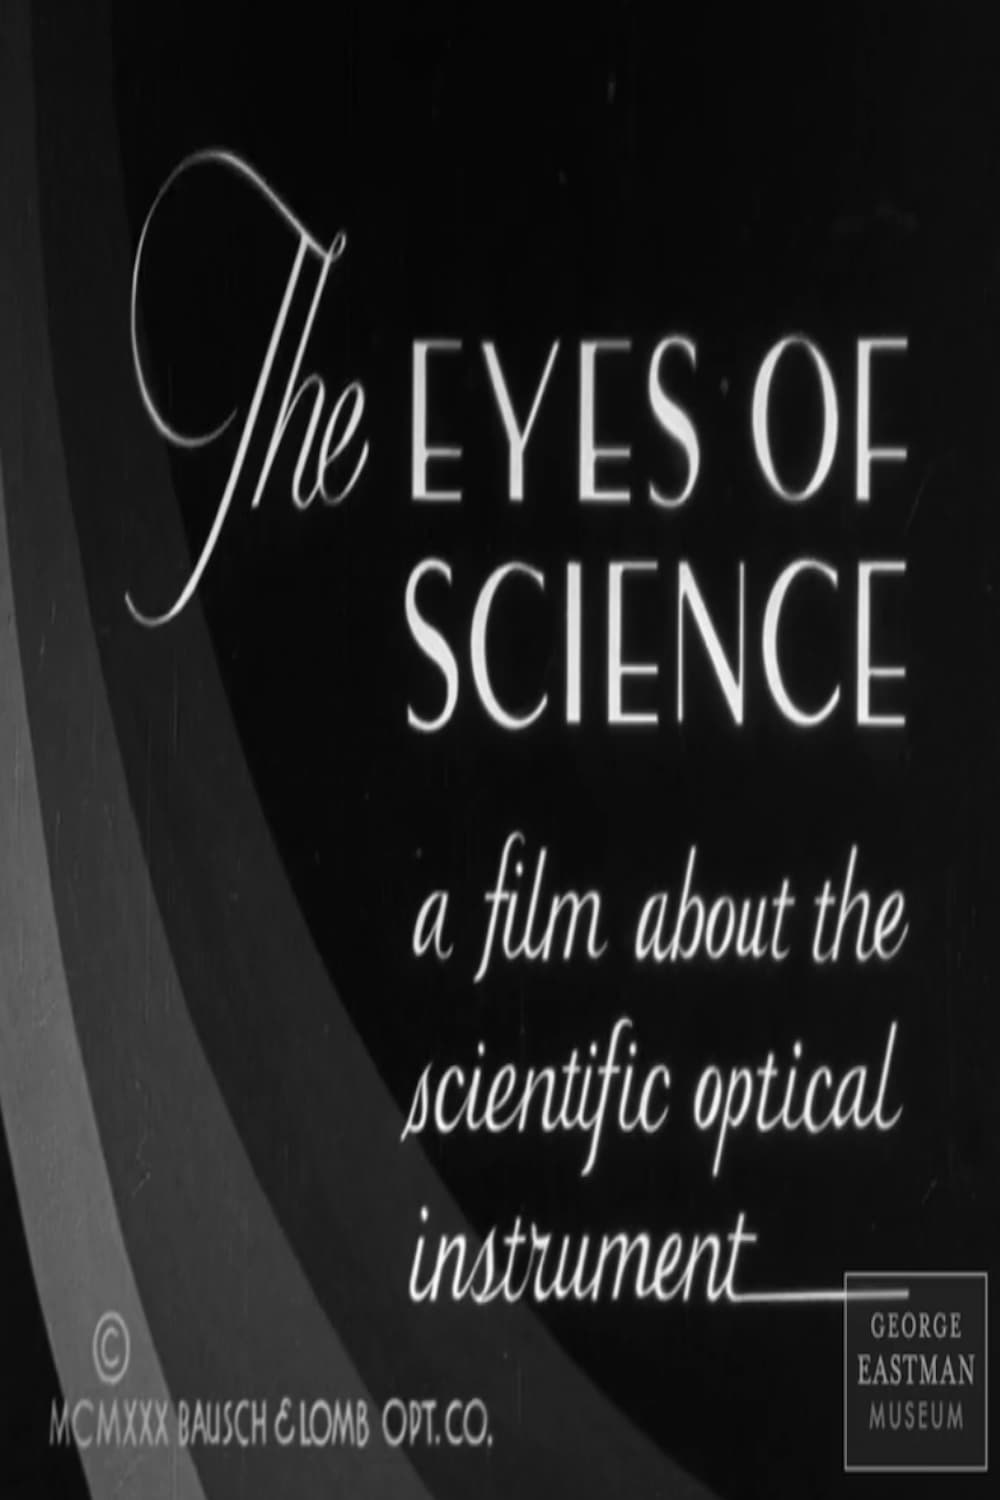 The Eyes of Science